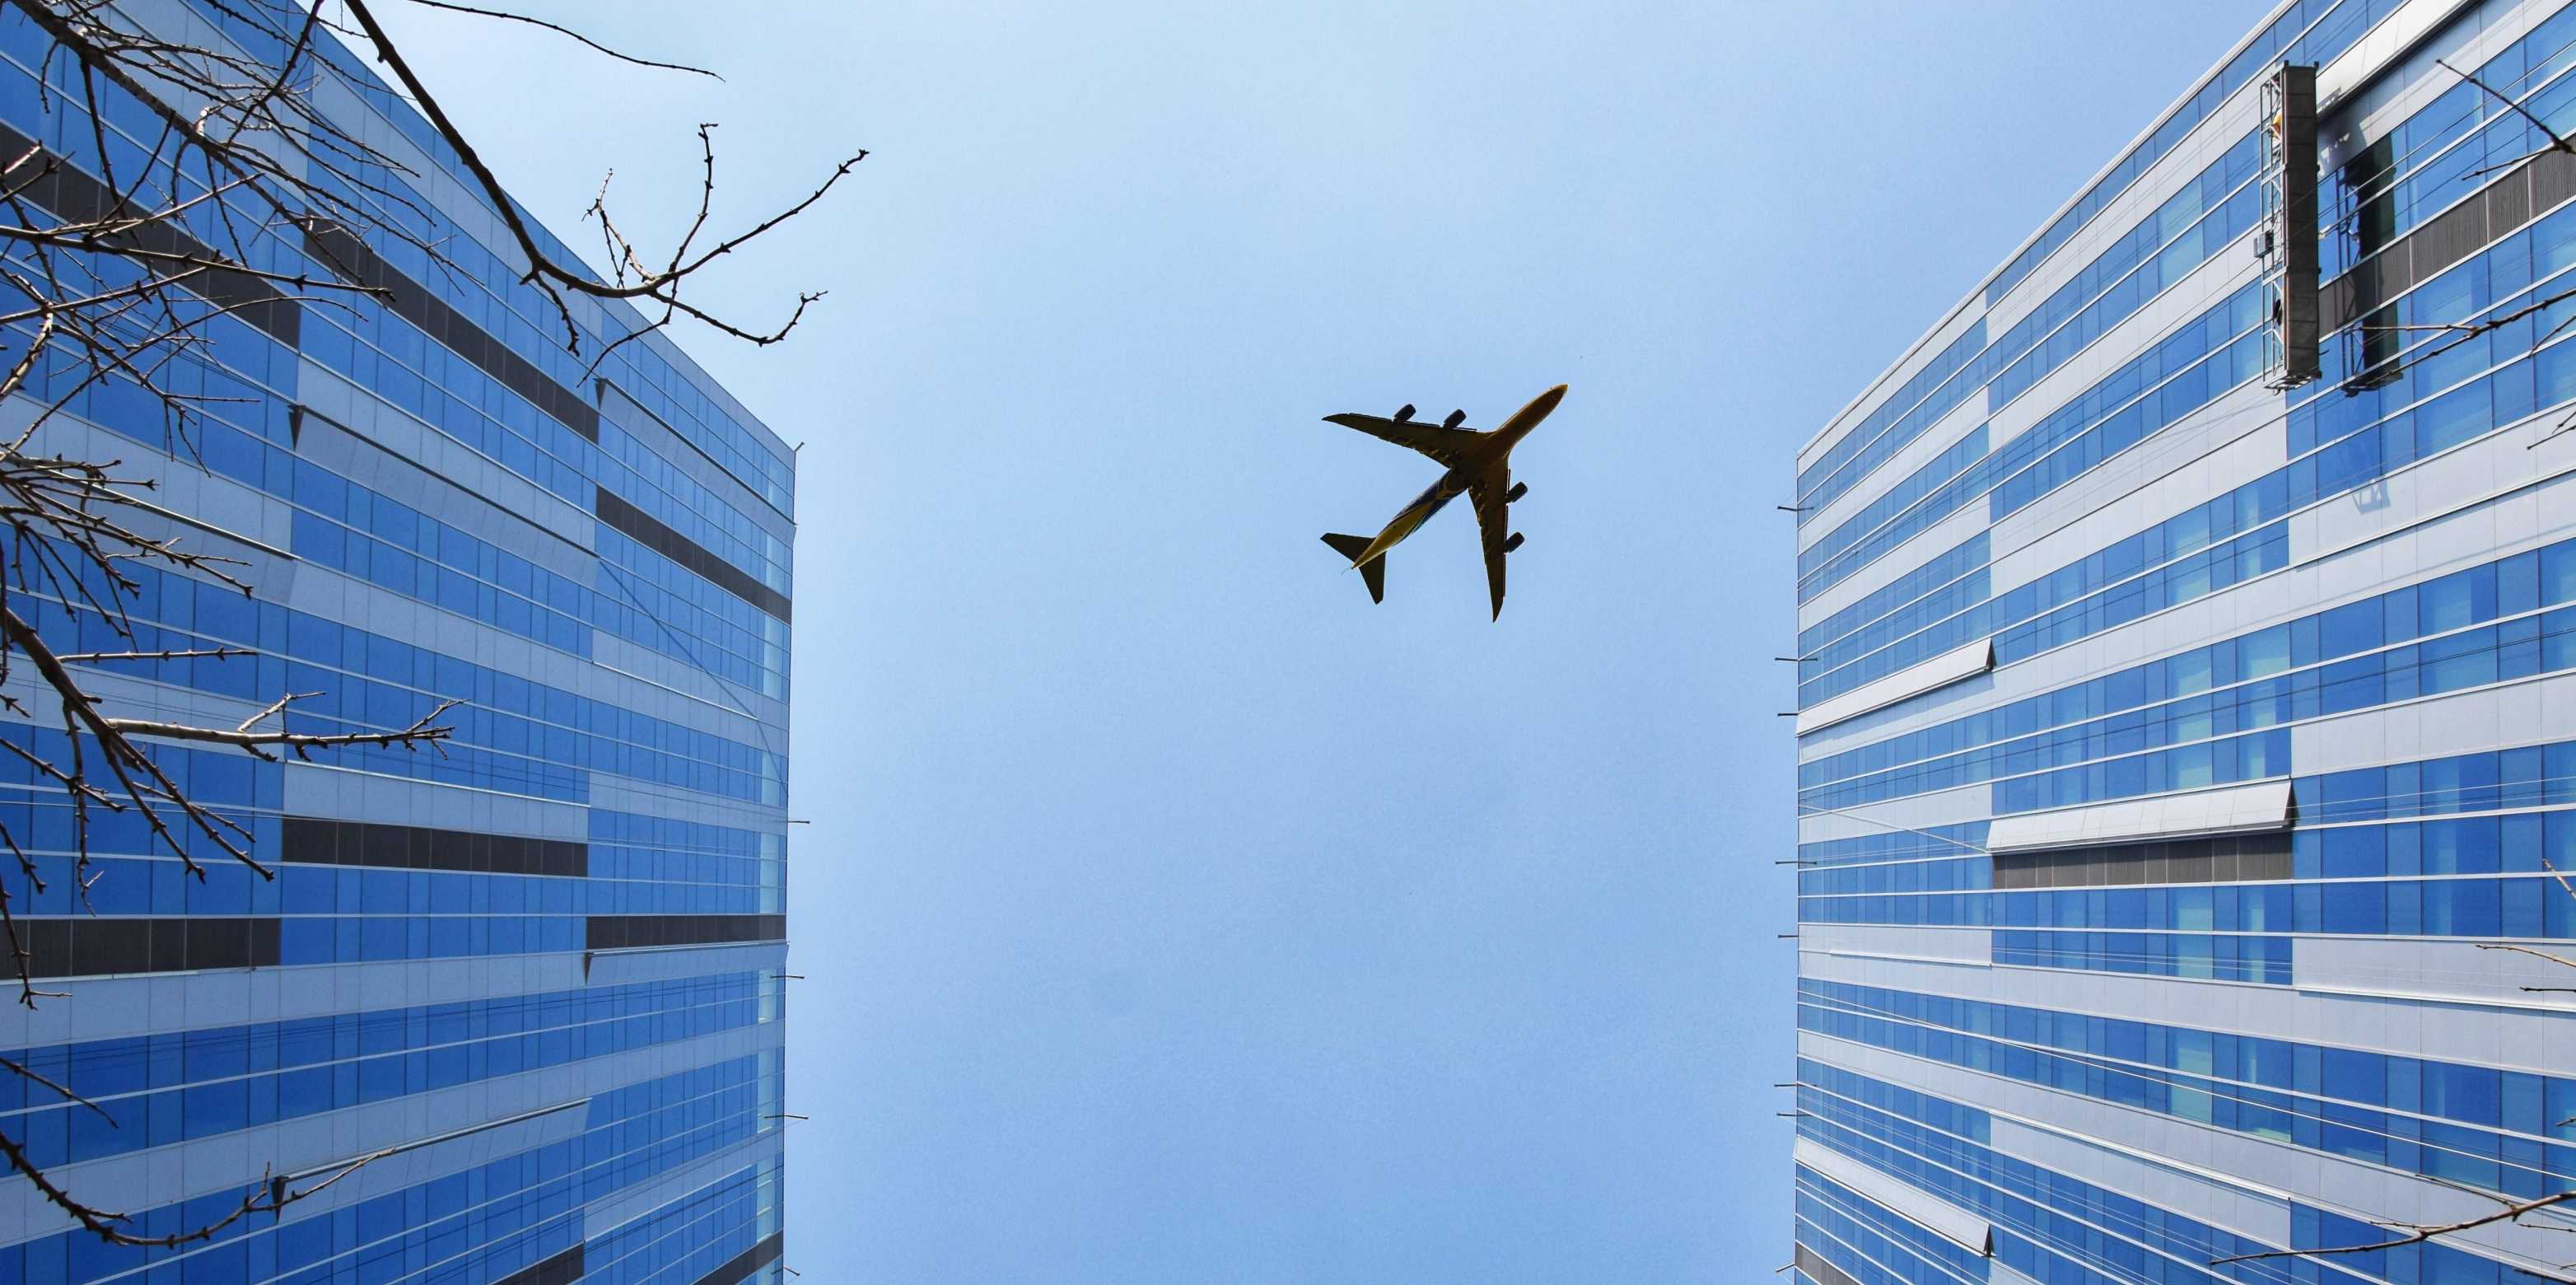 An airplane flying over buildings